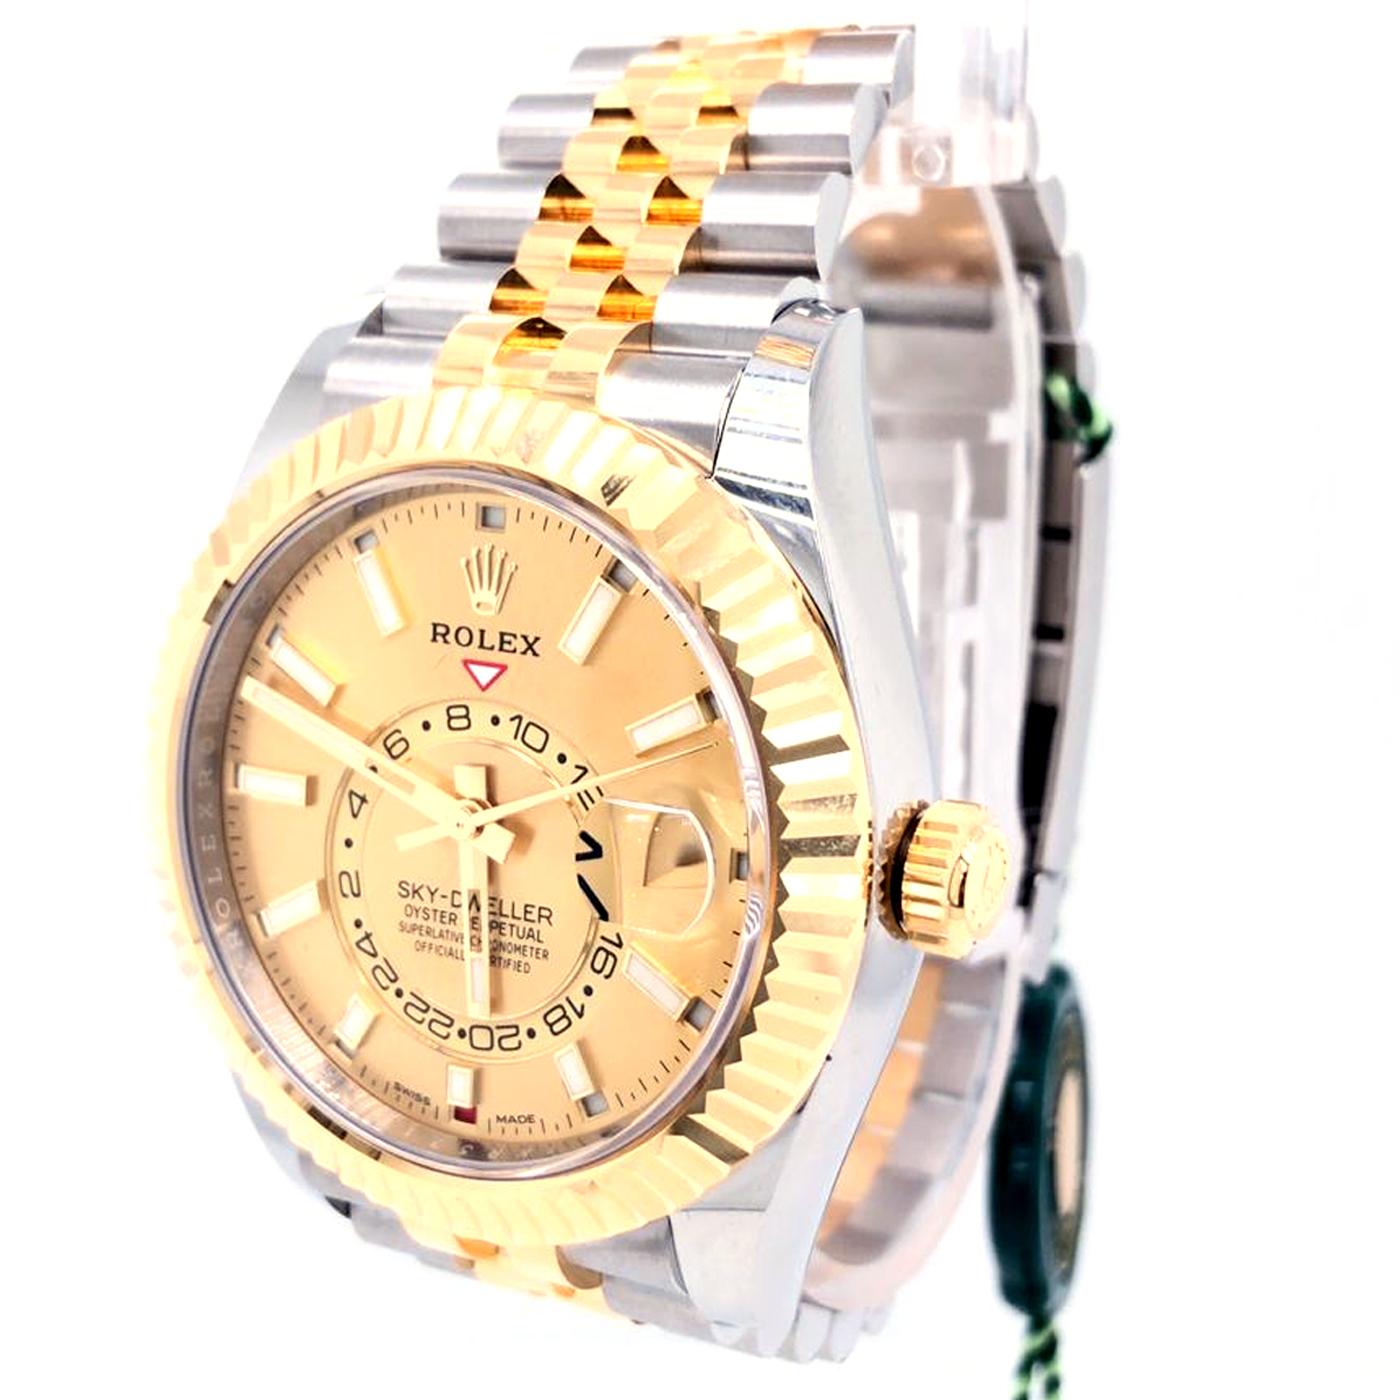 Rolex Sky-Dweller 42mm yellow Rolesor case comprised of a 904L steel monobloc middle case, screw-down back, screw-down crown, 18K yellow gold fluted bezel with bidirectional rotatable Rolex Ring Command, scratch-resistant sapphire crystal with